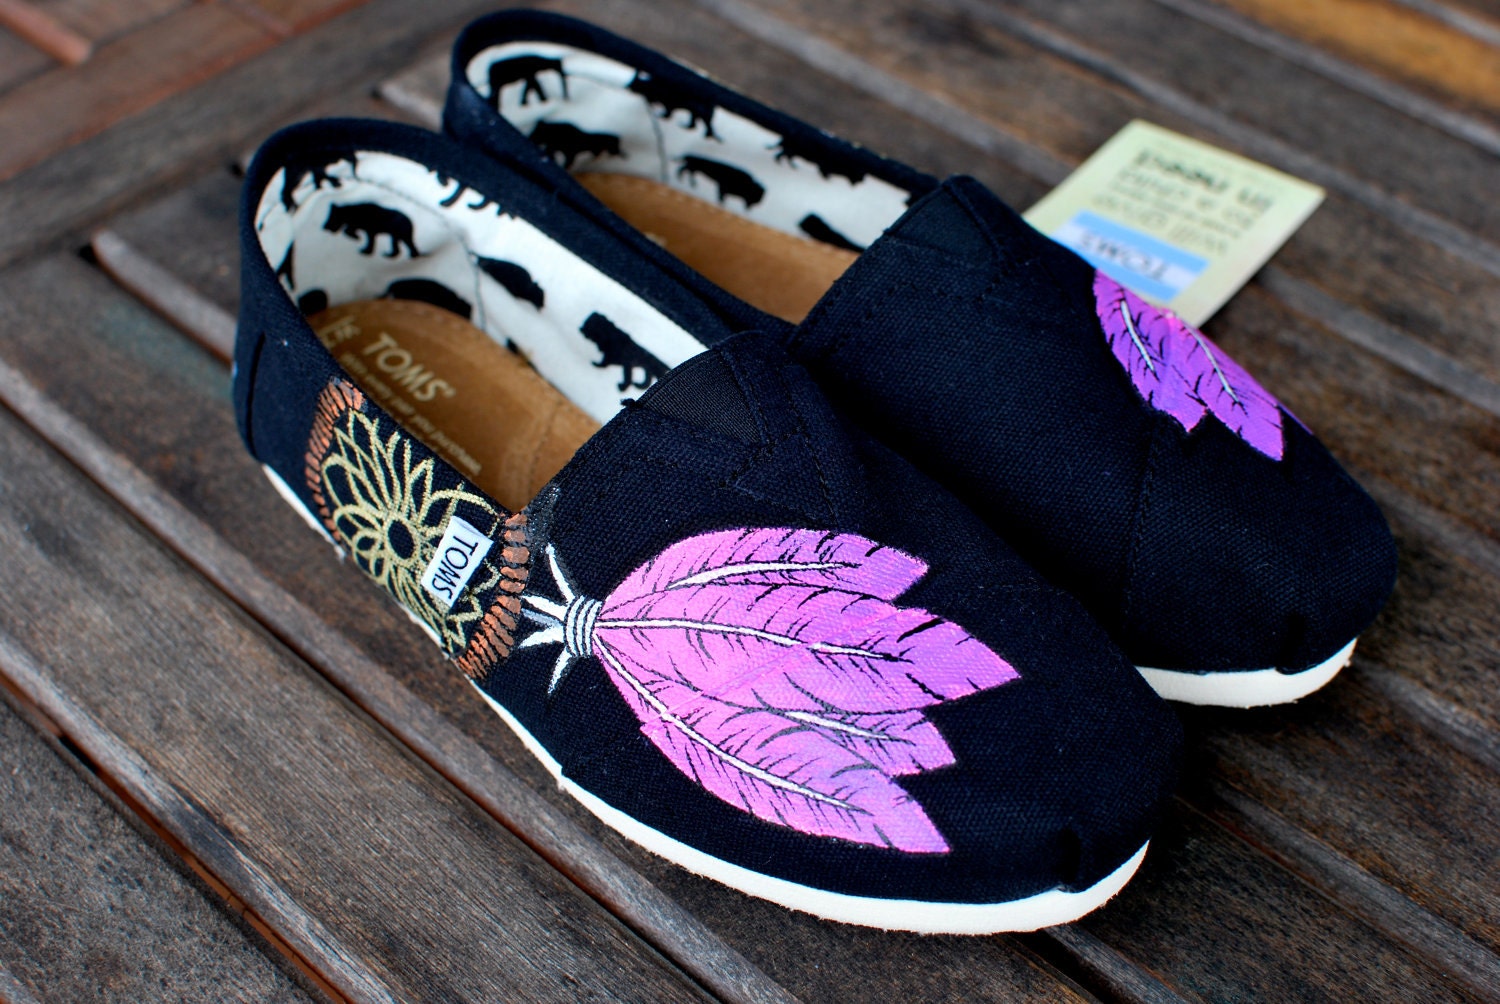 Dream Catcher TOMS shoes by BStreetShoes on Etsy